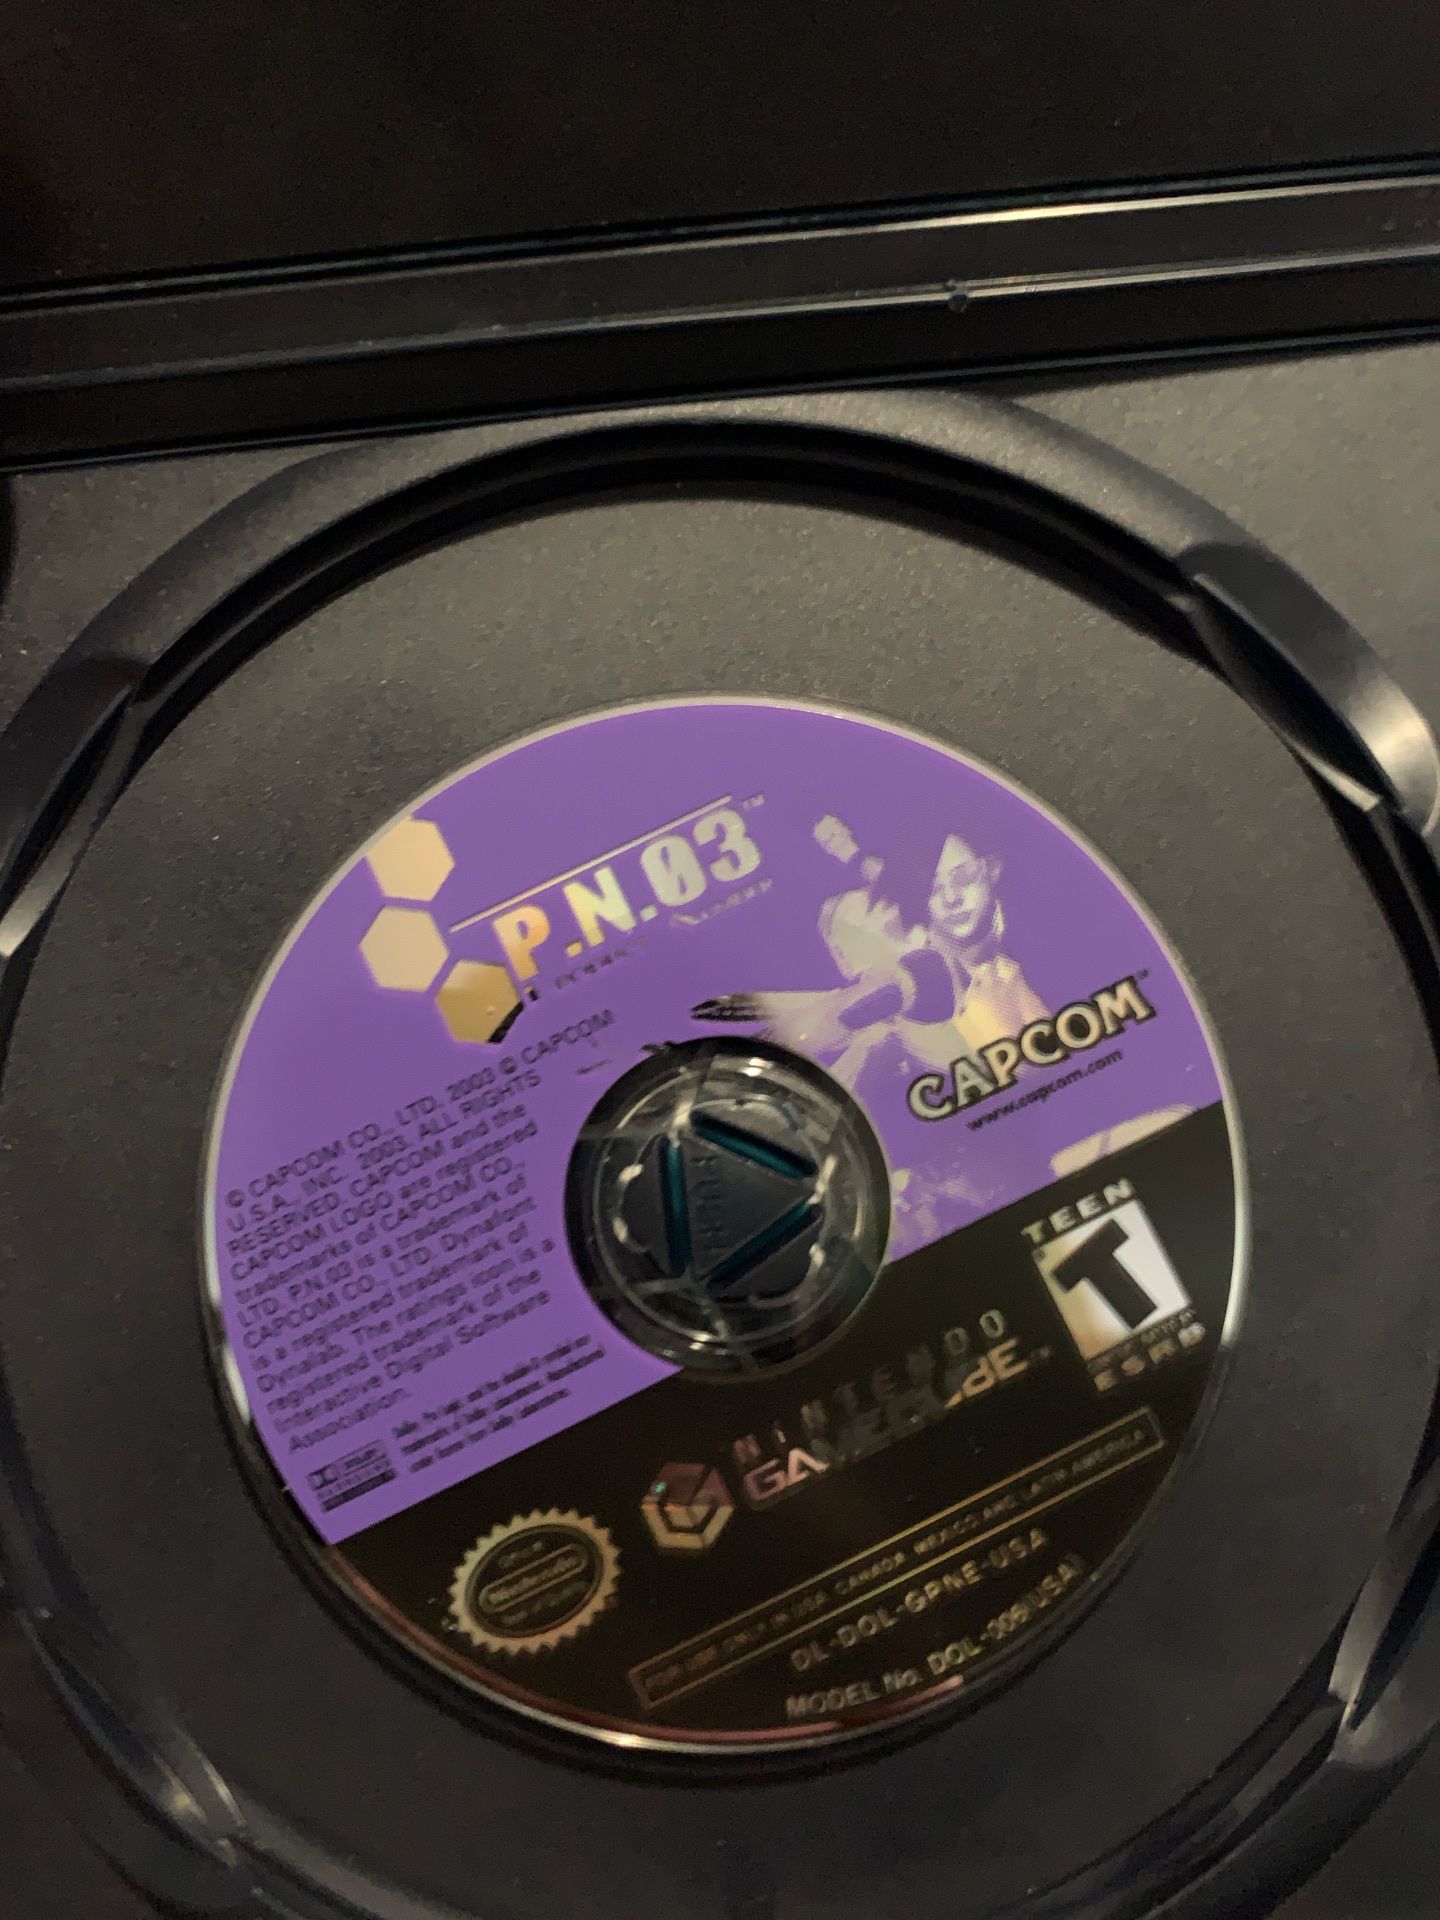 P.N.03 GameCube (Disc Only)